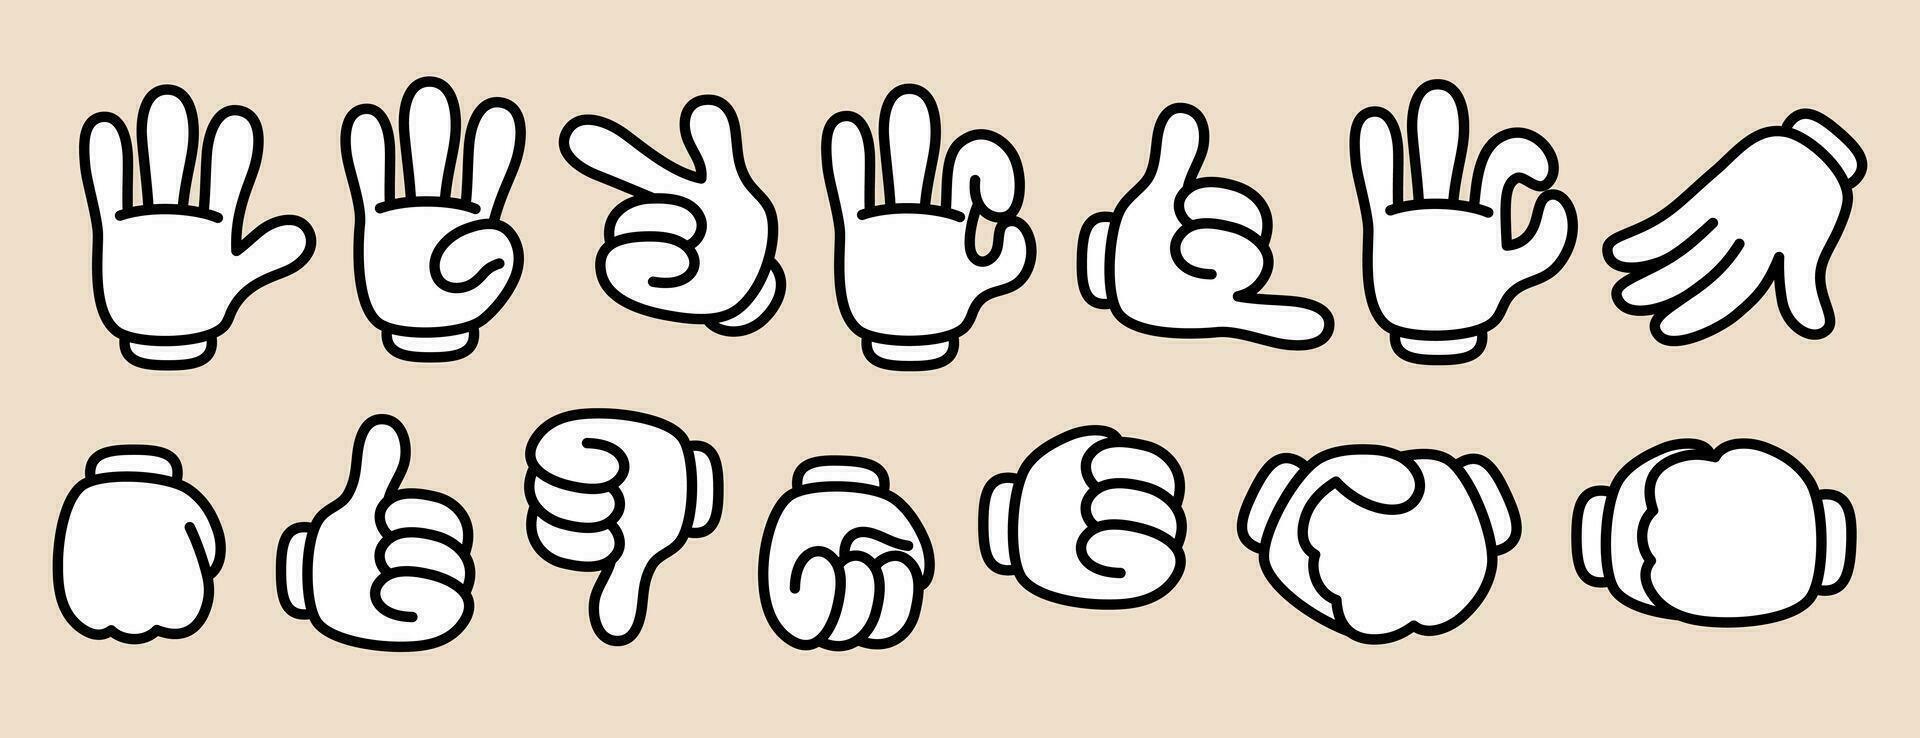 Retro cartoon hands in gloves. Vintage comic gestures and hands poses. Animation mascot body parts. Vector illustration